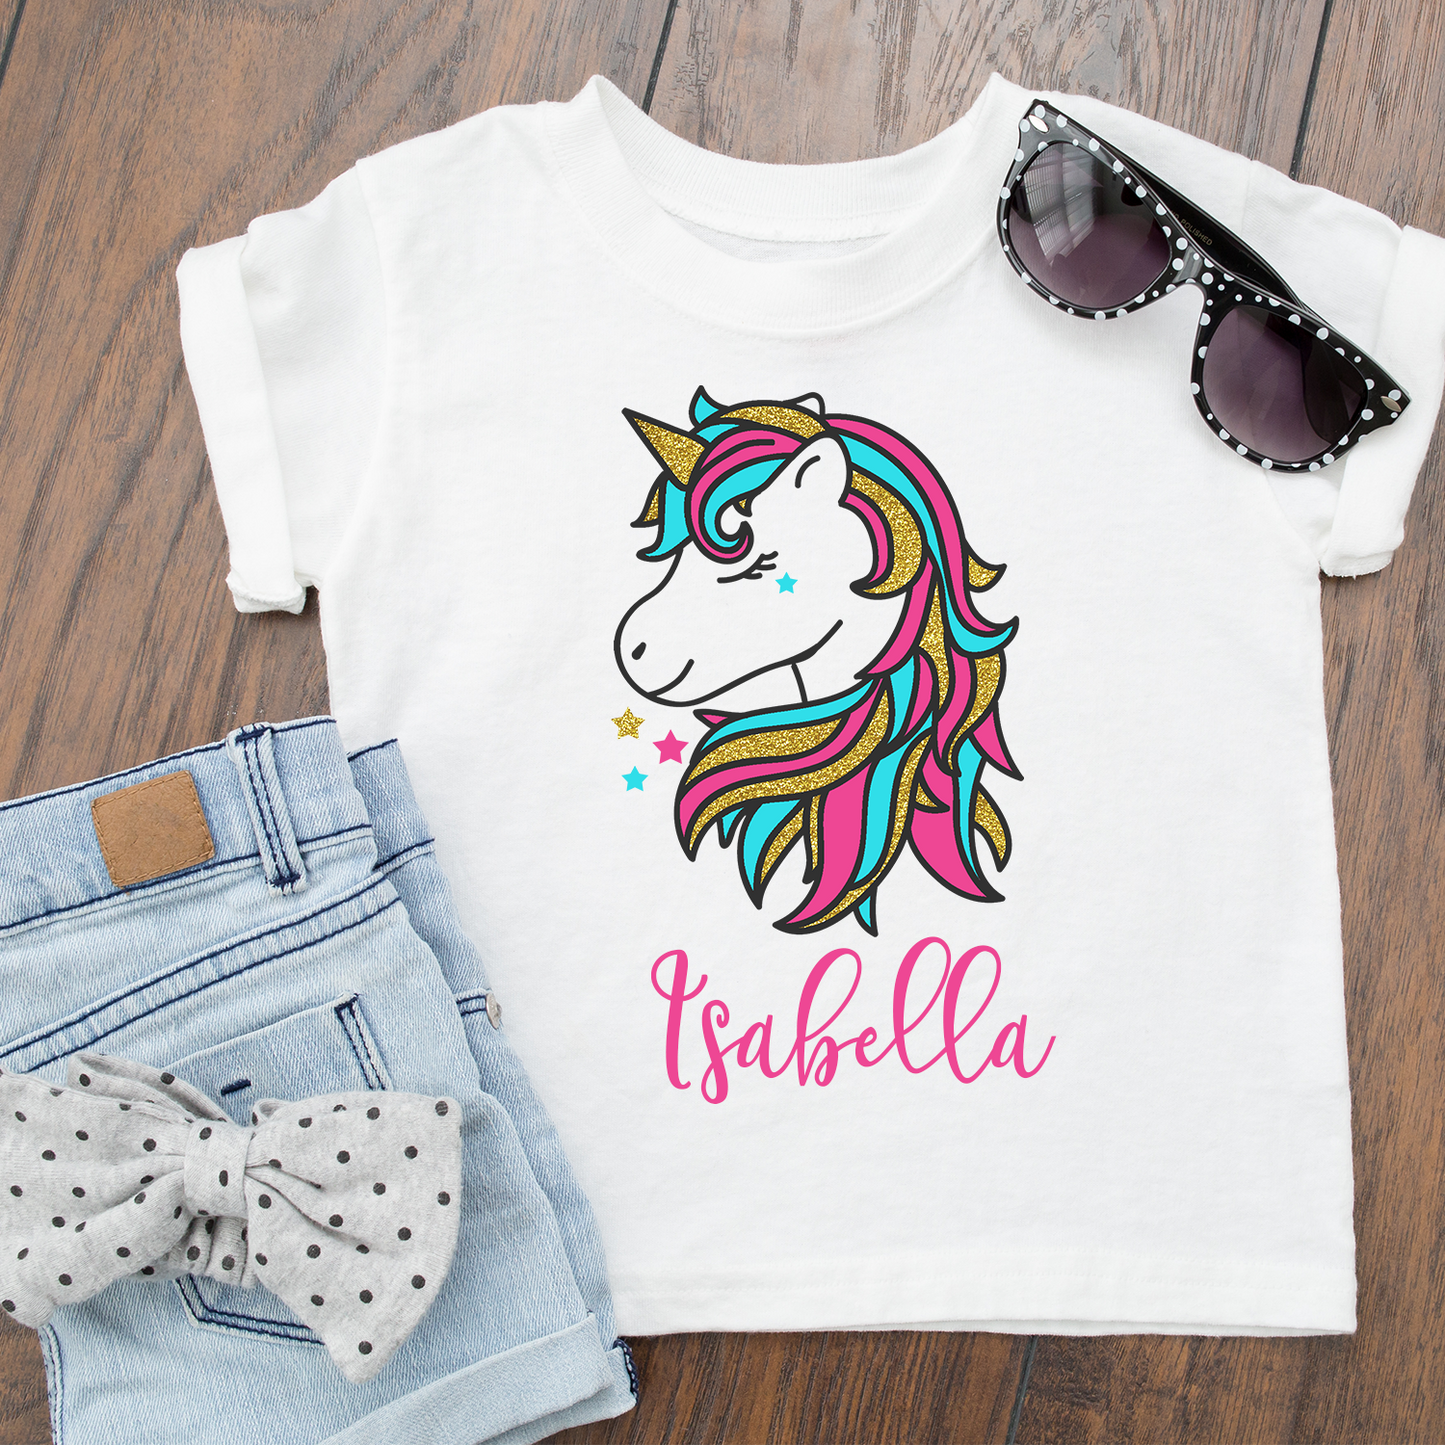 Personalised Girly Glitter Unicorn T-Shirt Top baby, toddler and kids – A.C  designs ltd